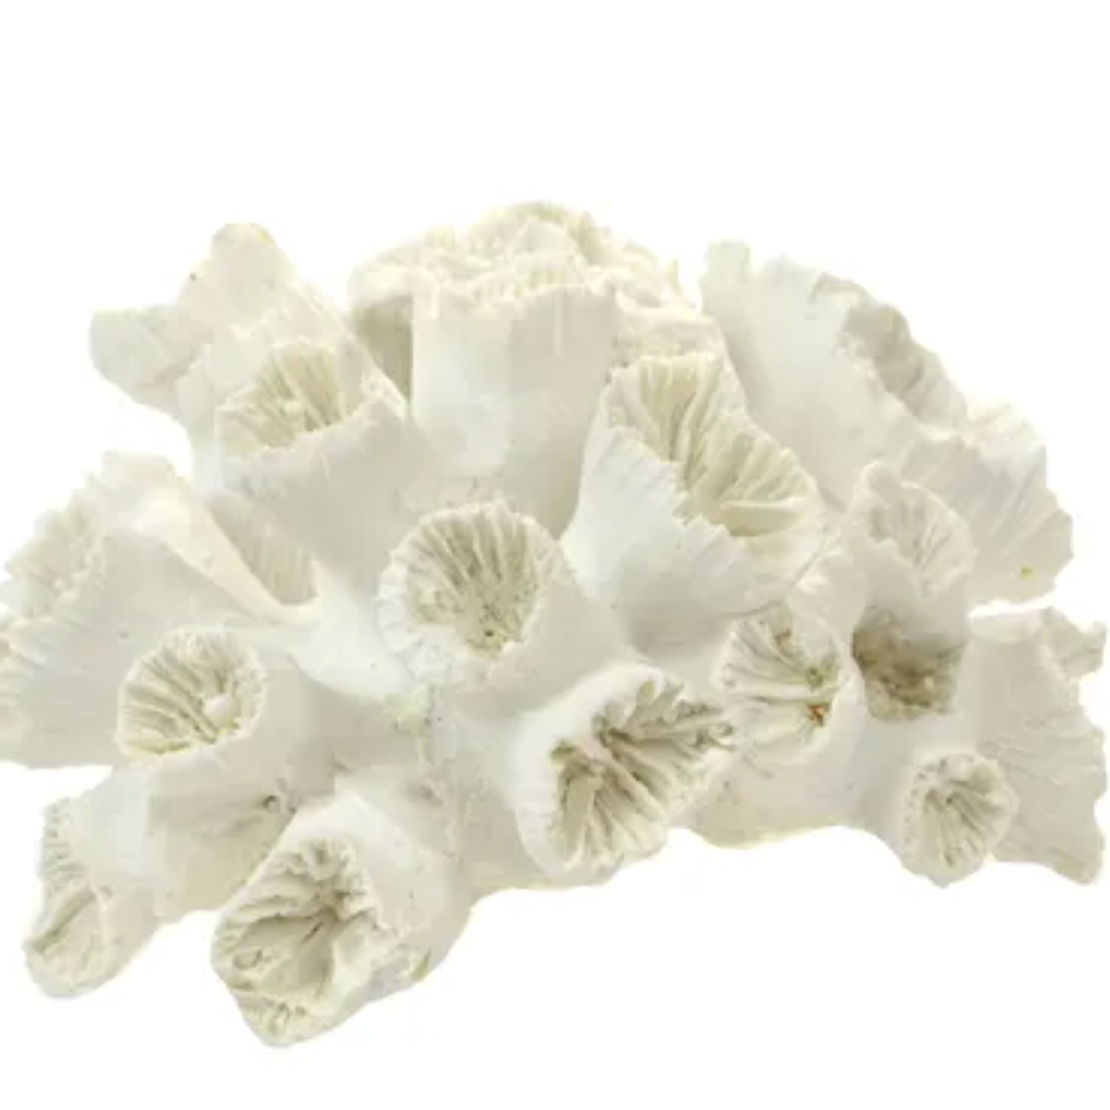 STONY CORAL RESIN SCULPTURE WHITE - Daisy Grace Lifestyle